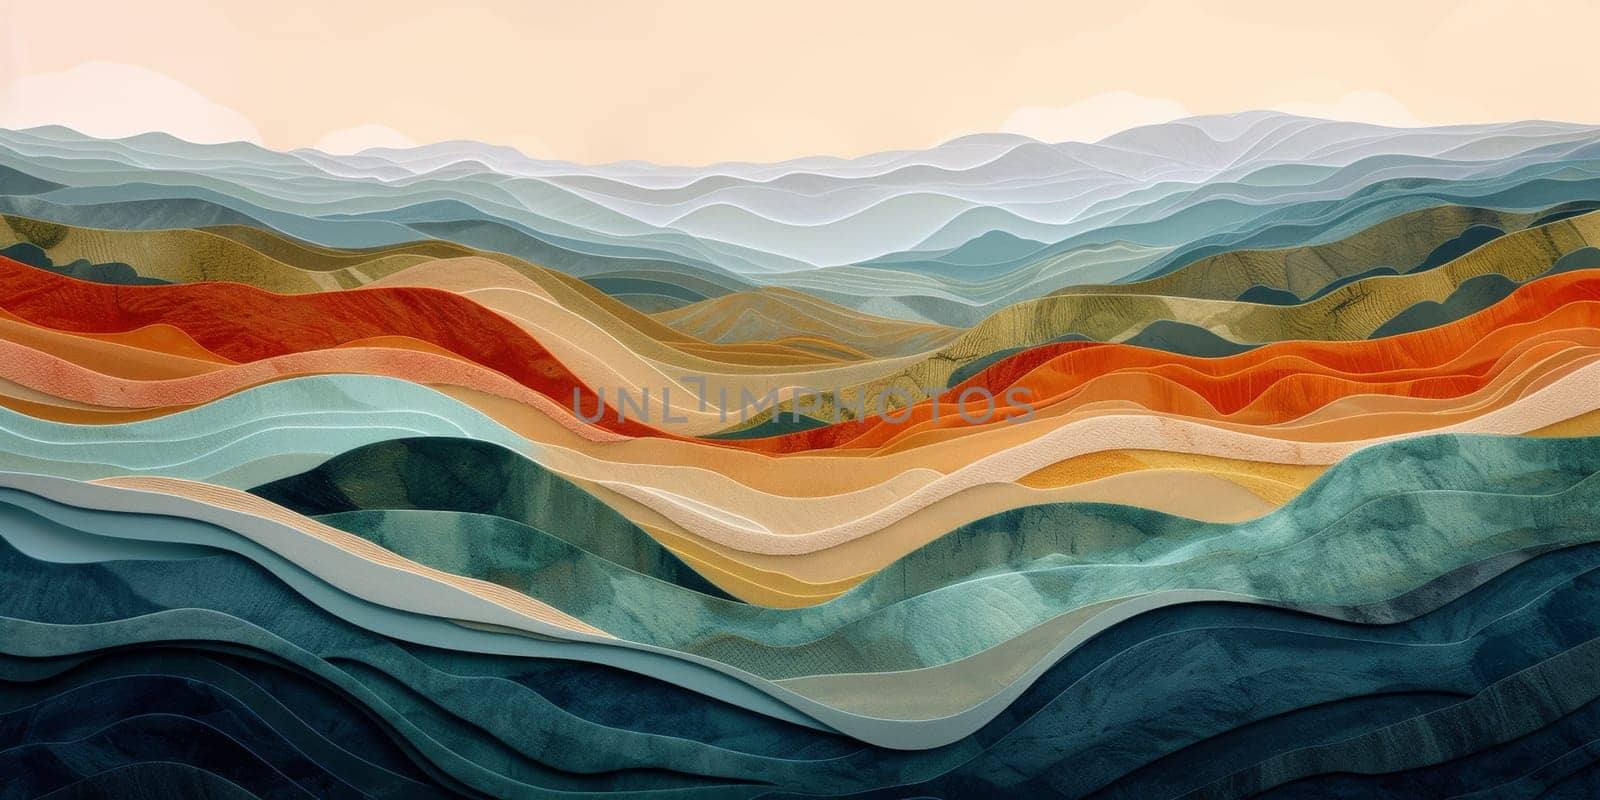 A painting of a mountainous landscape with many different colors, AI by starush